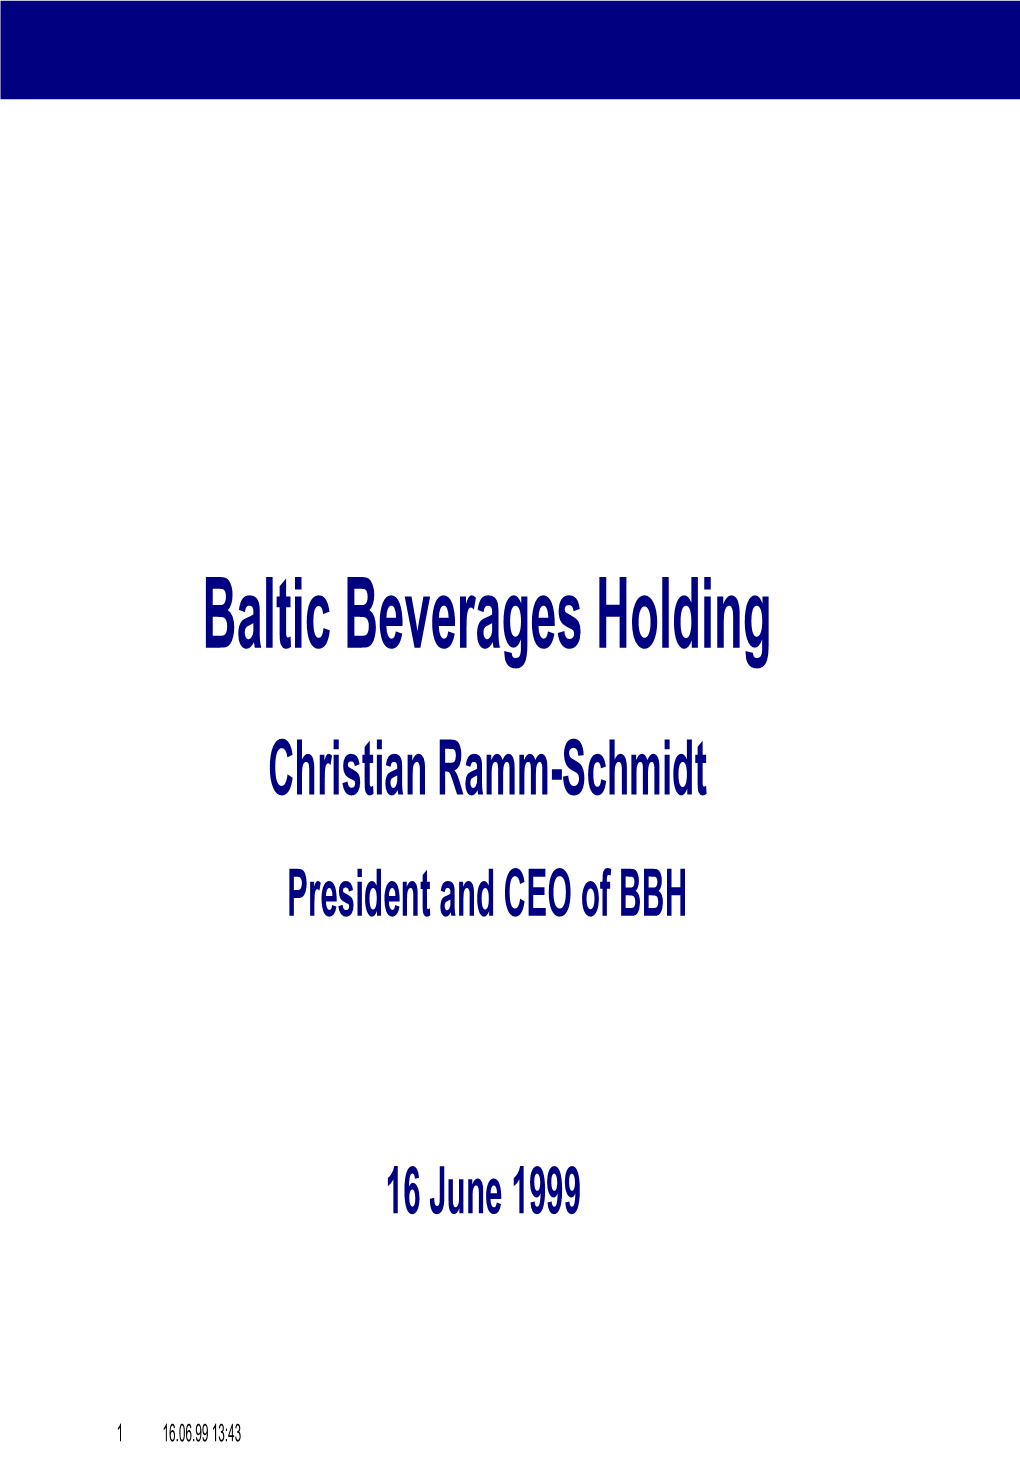 Baltic Beverages Holding Christian Ramm-Schmidt President and CEO of BBH